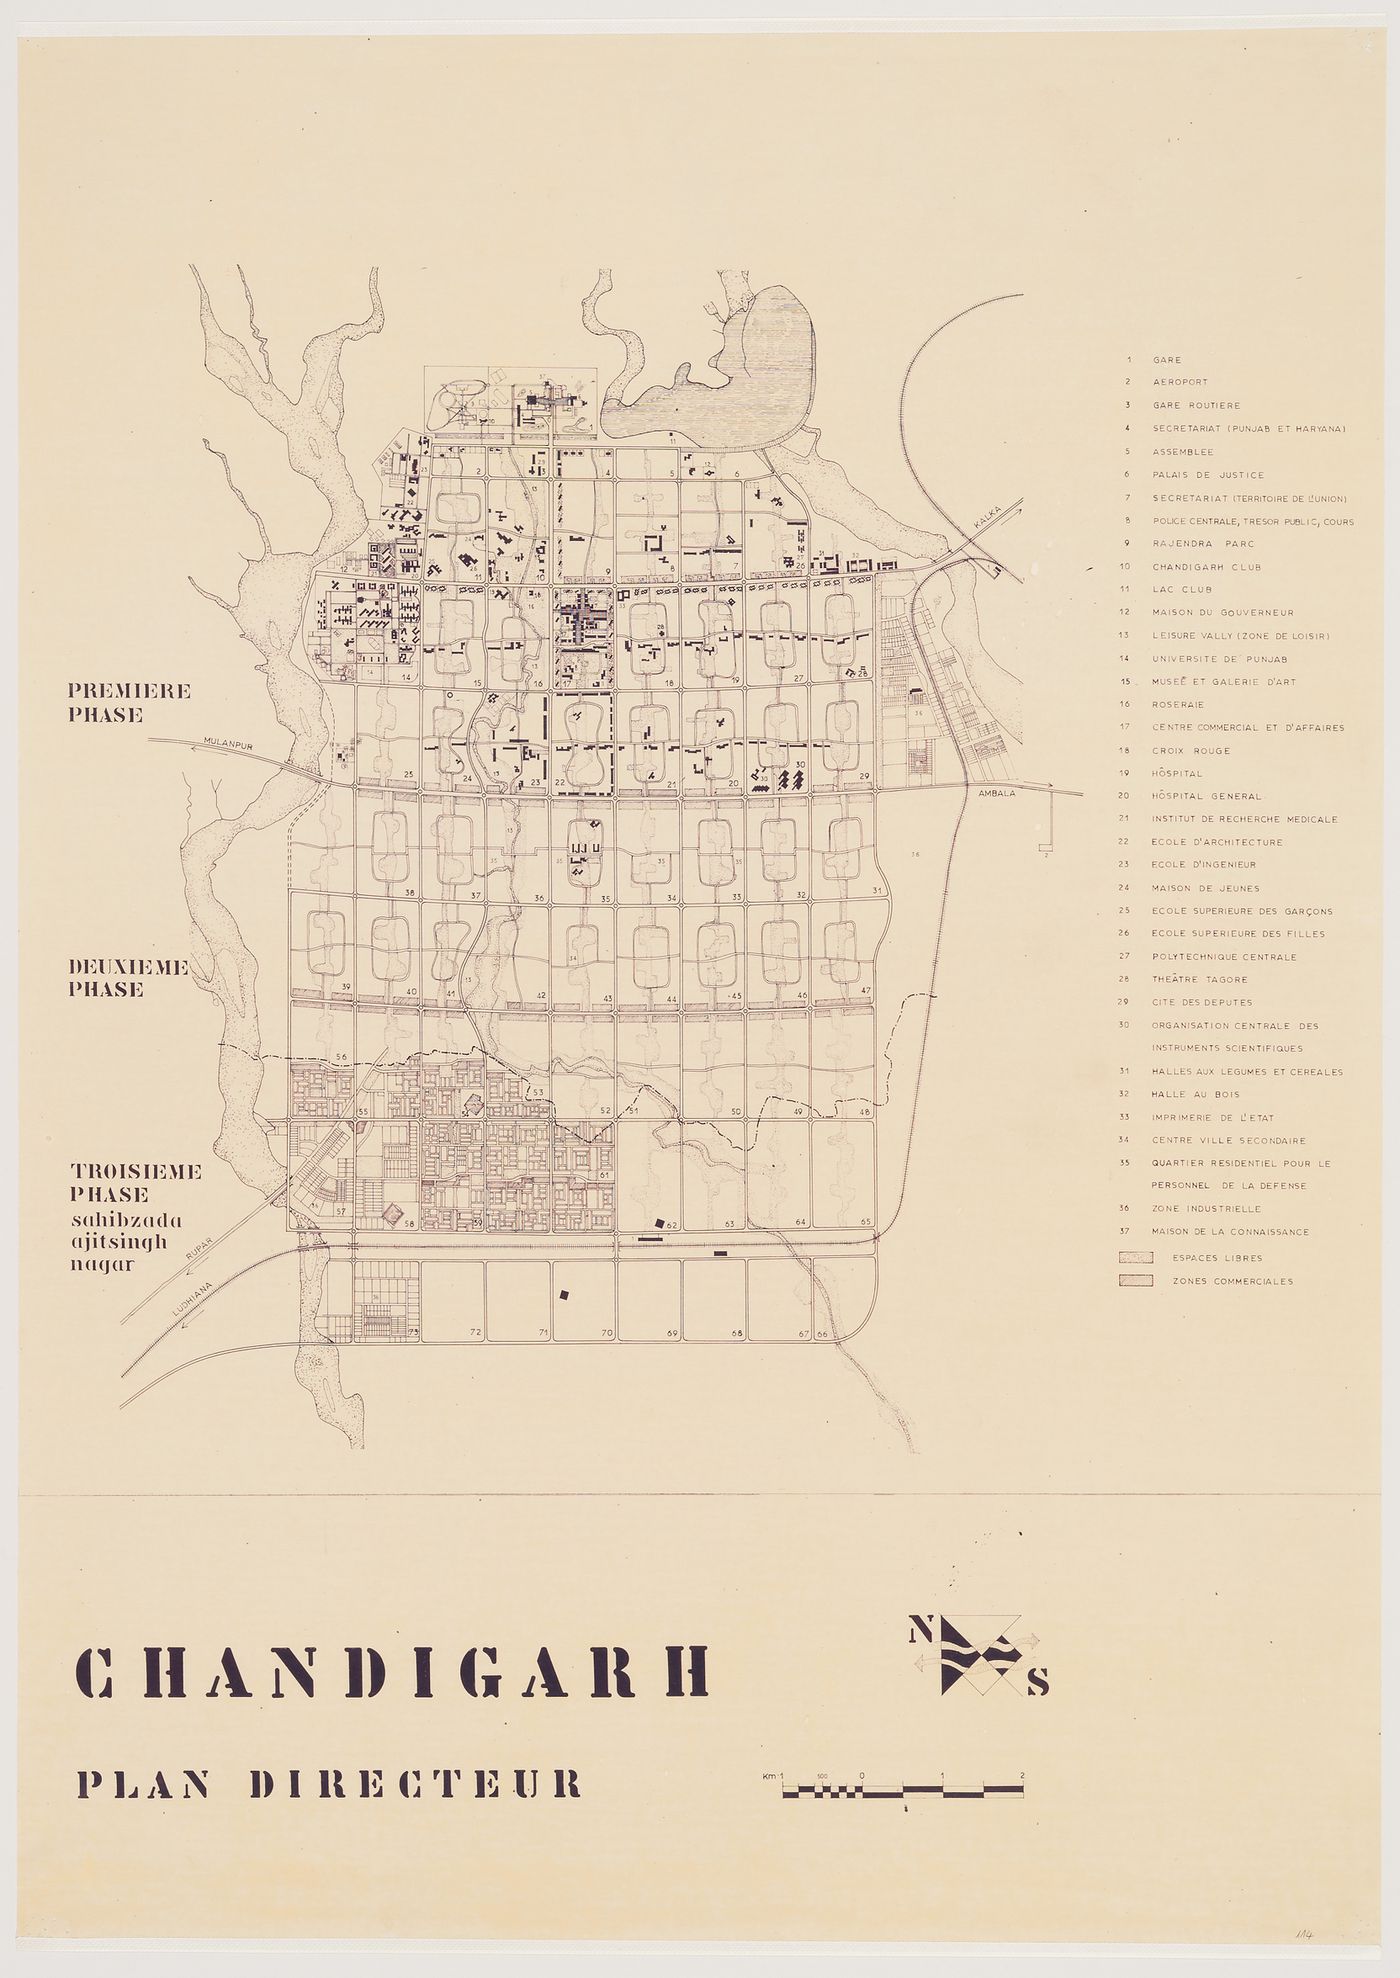 Master plan for Chandigarh, India